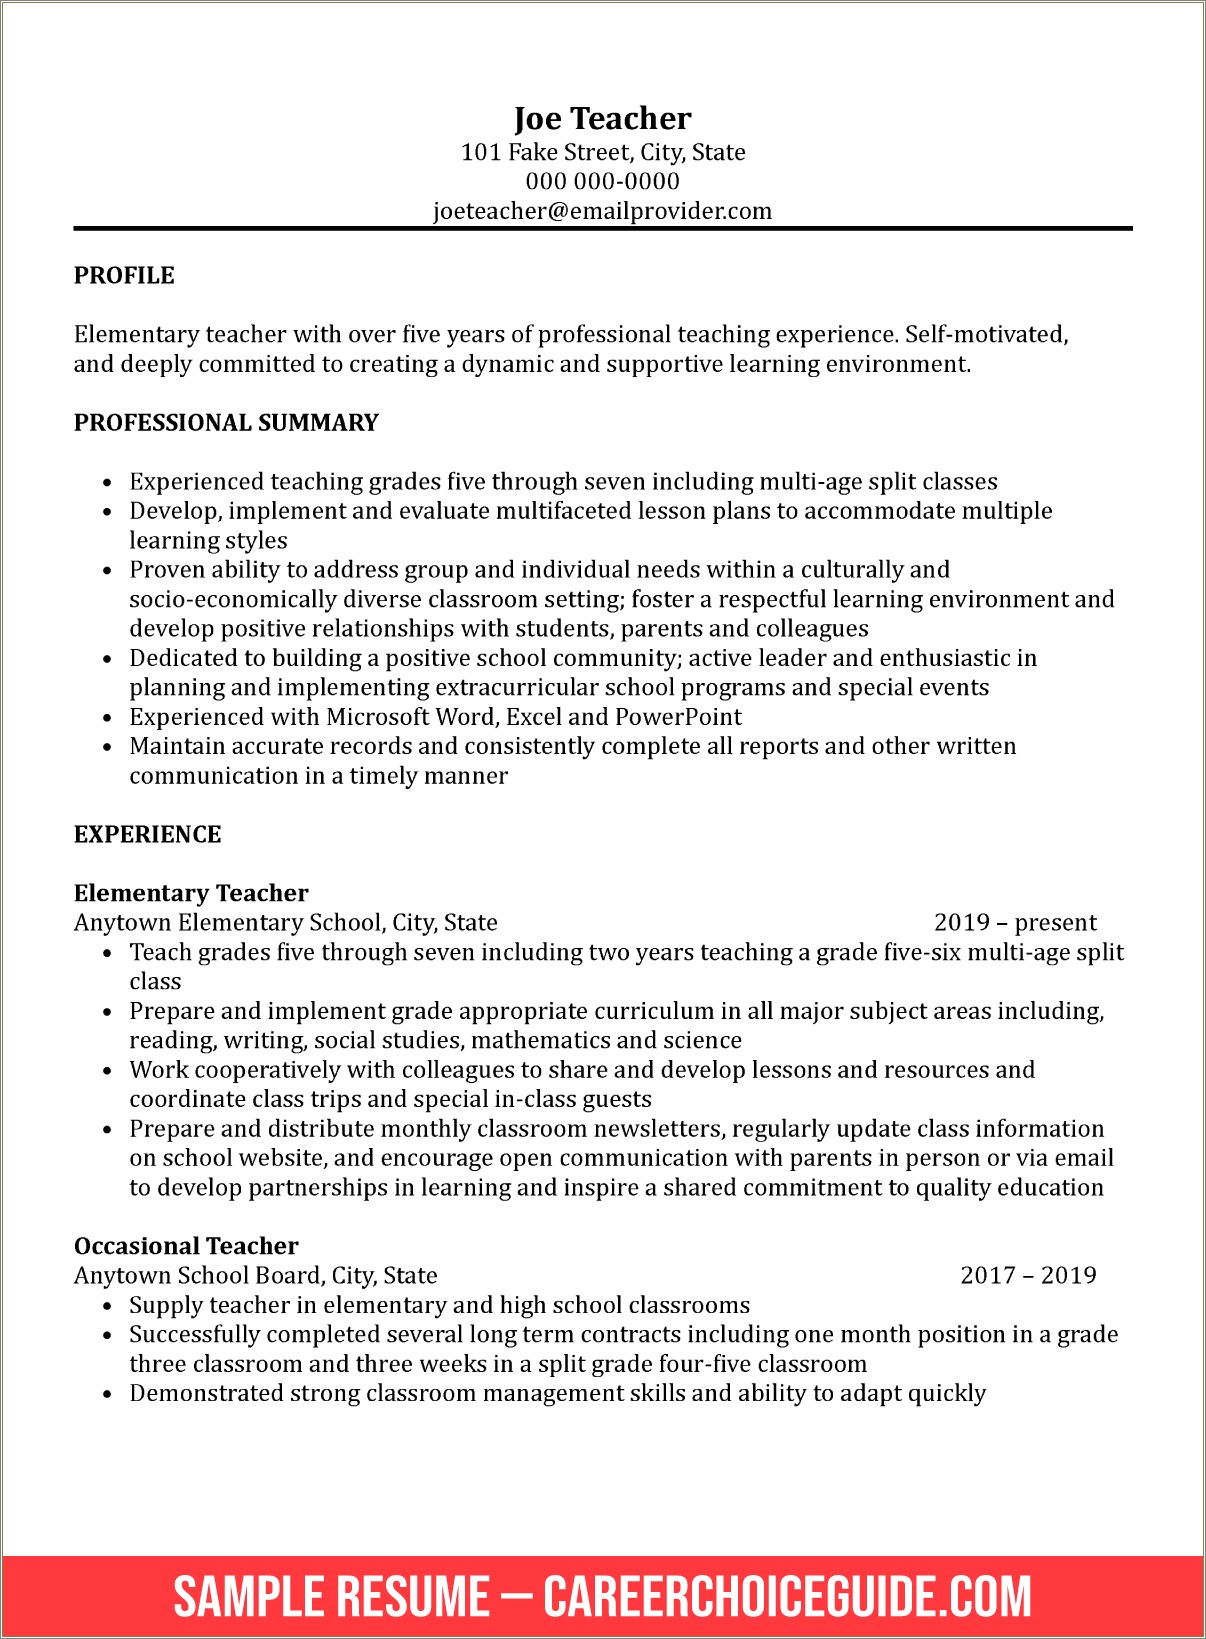 Professional Summary On Resume For Teaching